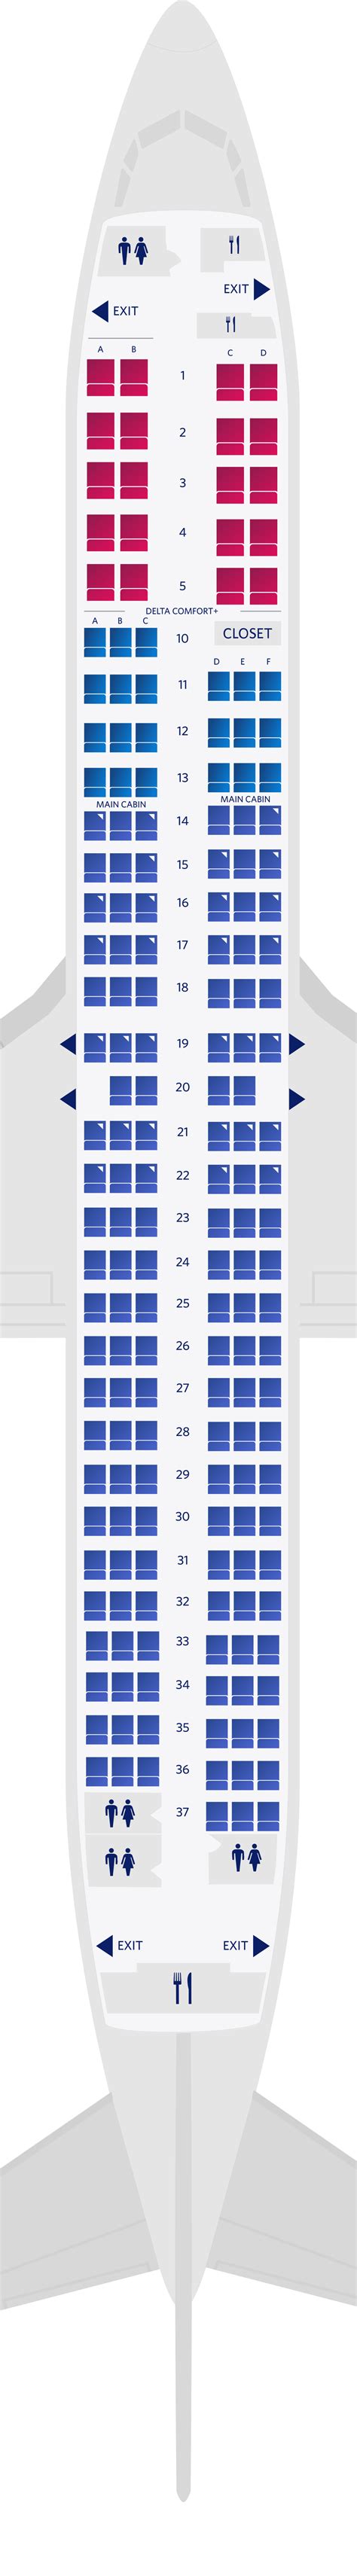 View seat map for Boeing 757-300 and learn about interior specifications such as size, entertainment, cabin availability, and more. English - United States $ ... United Economy ® 3D View: 3D seat view: 3D seat view: 3D seat view: Number of seats: 24: 54: 156: Seat numbers: 1A-6F: 7D-14F, 21A-F, 23A-F, 35B-E: 15A-20F, 22B-E, 24A-34F, 35A, 35F .... 